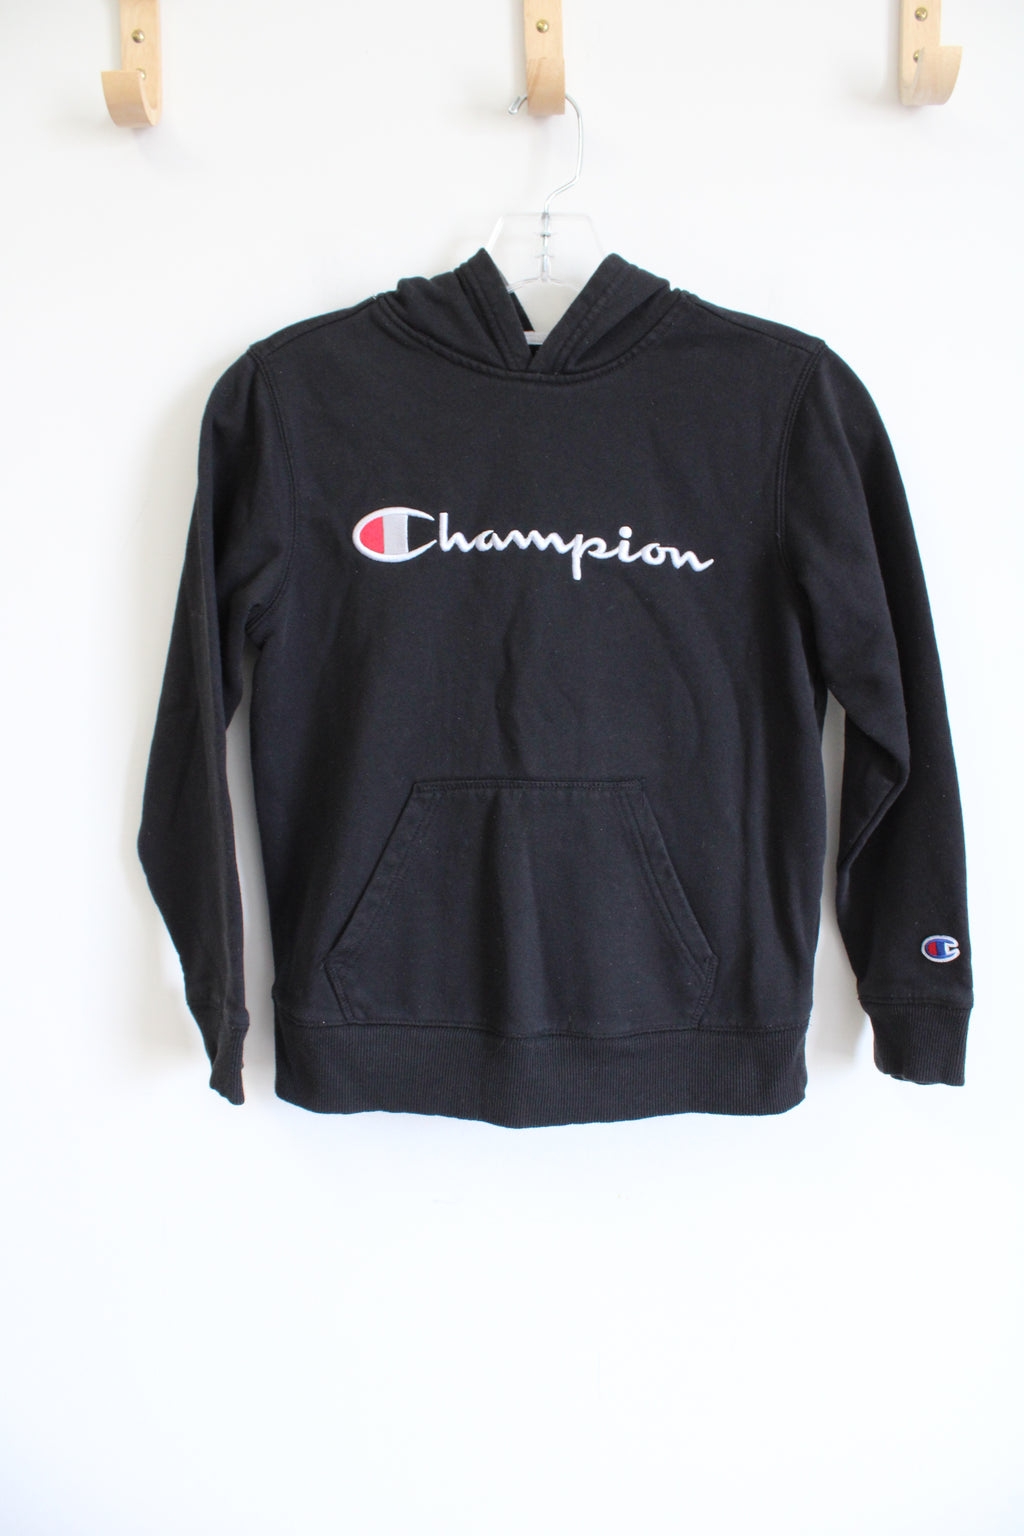 Champion Black Embroidered Logo Hoodie | Youth M (10/12)